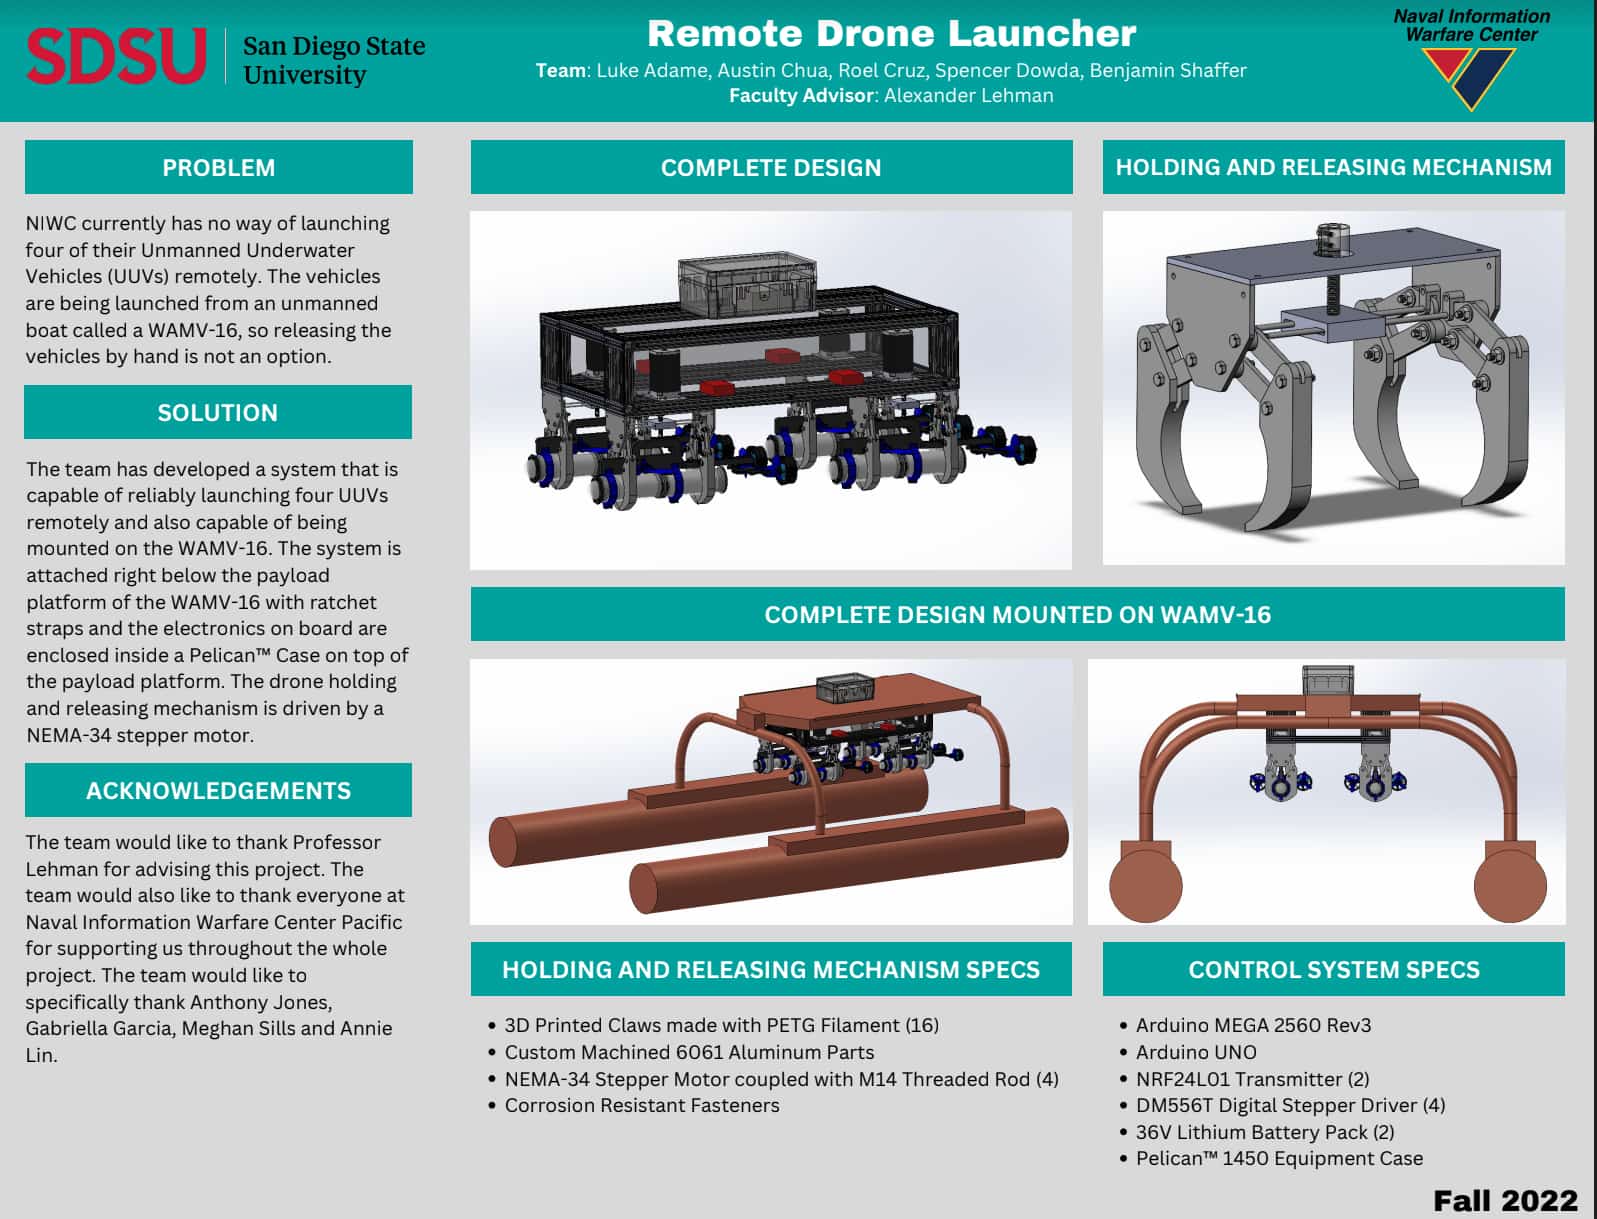 Remote Done Launcher Science Poster